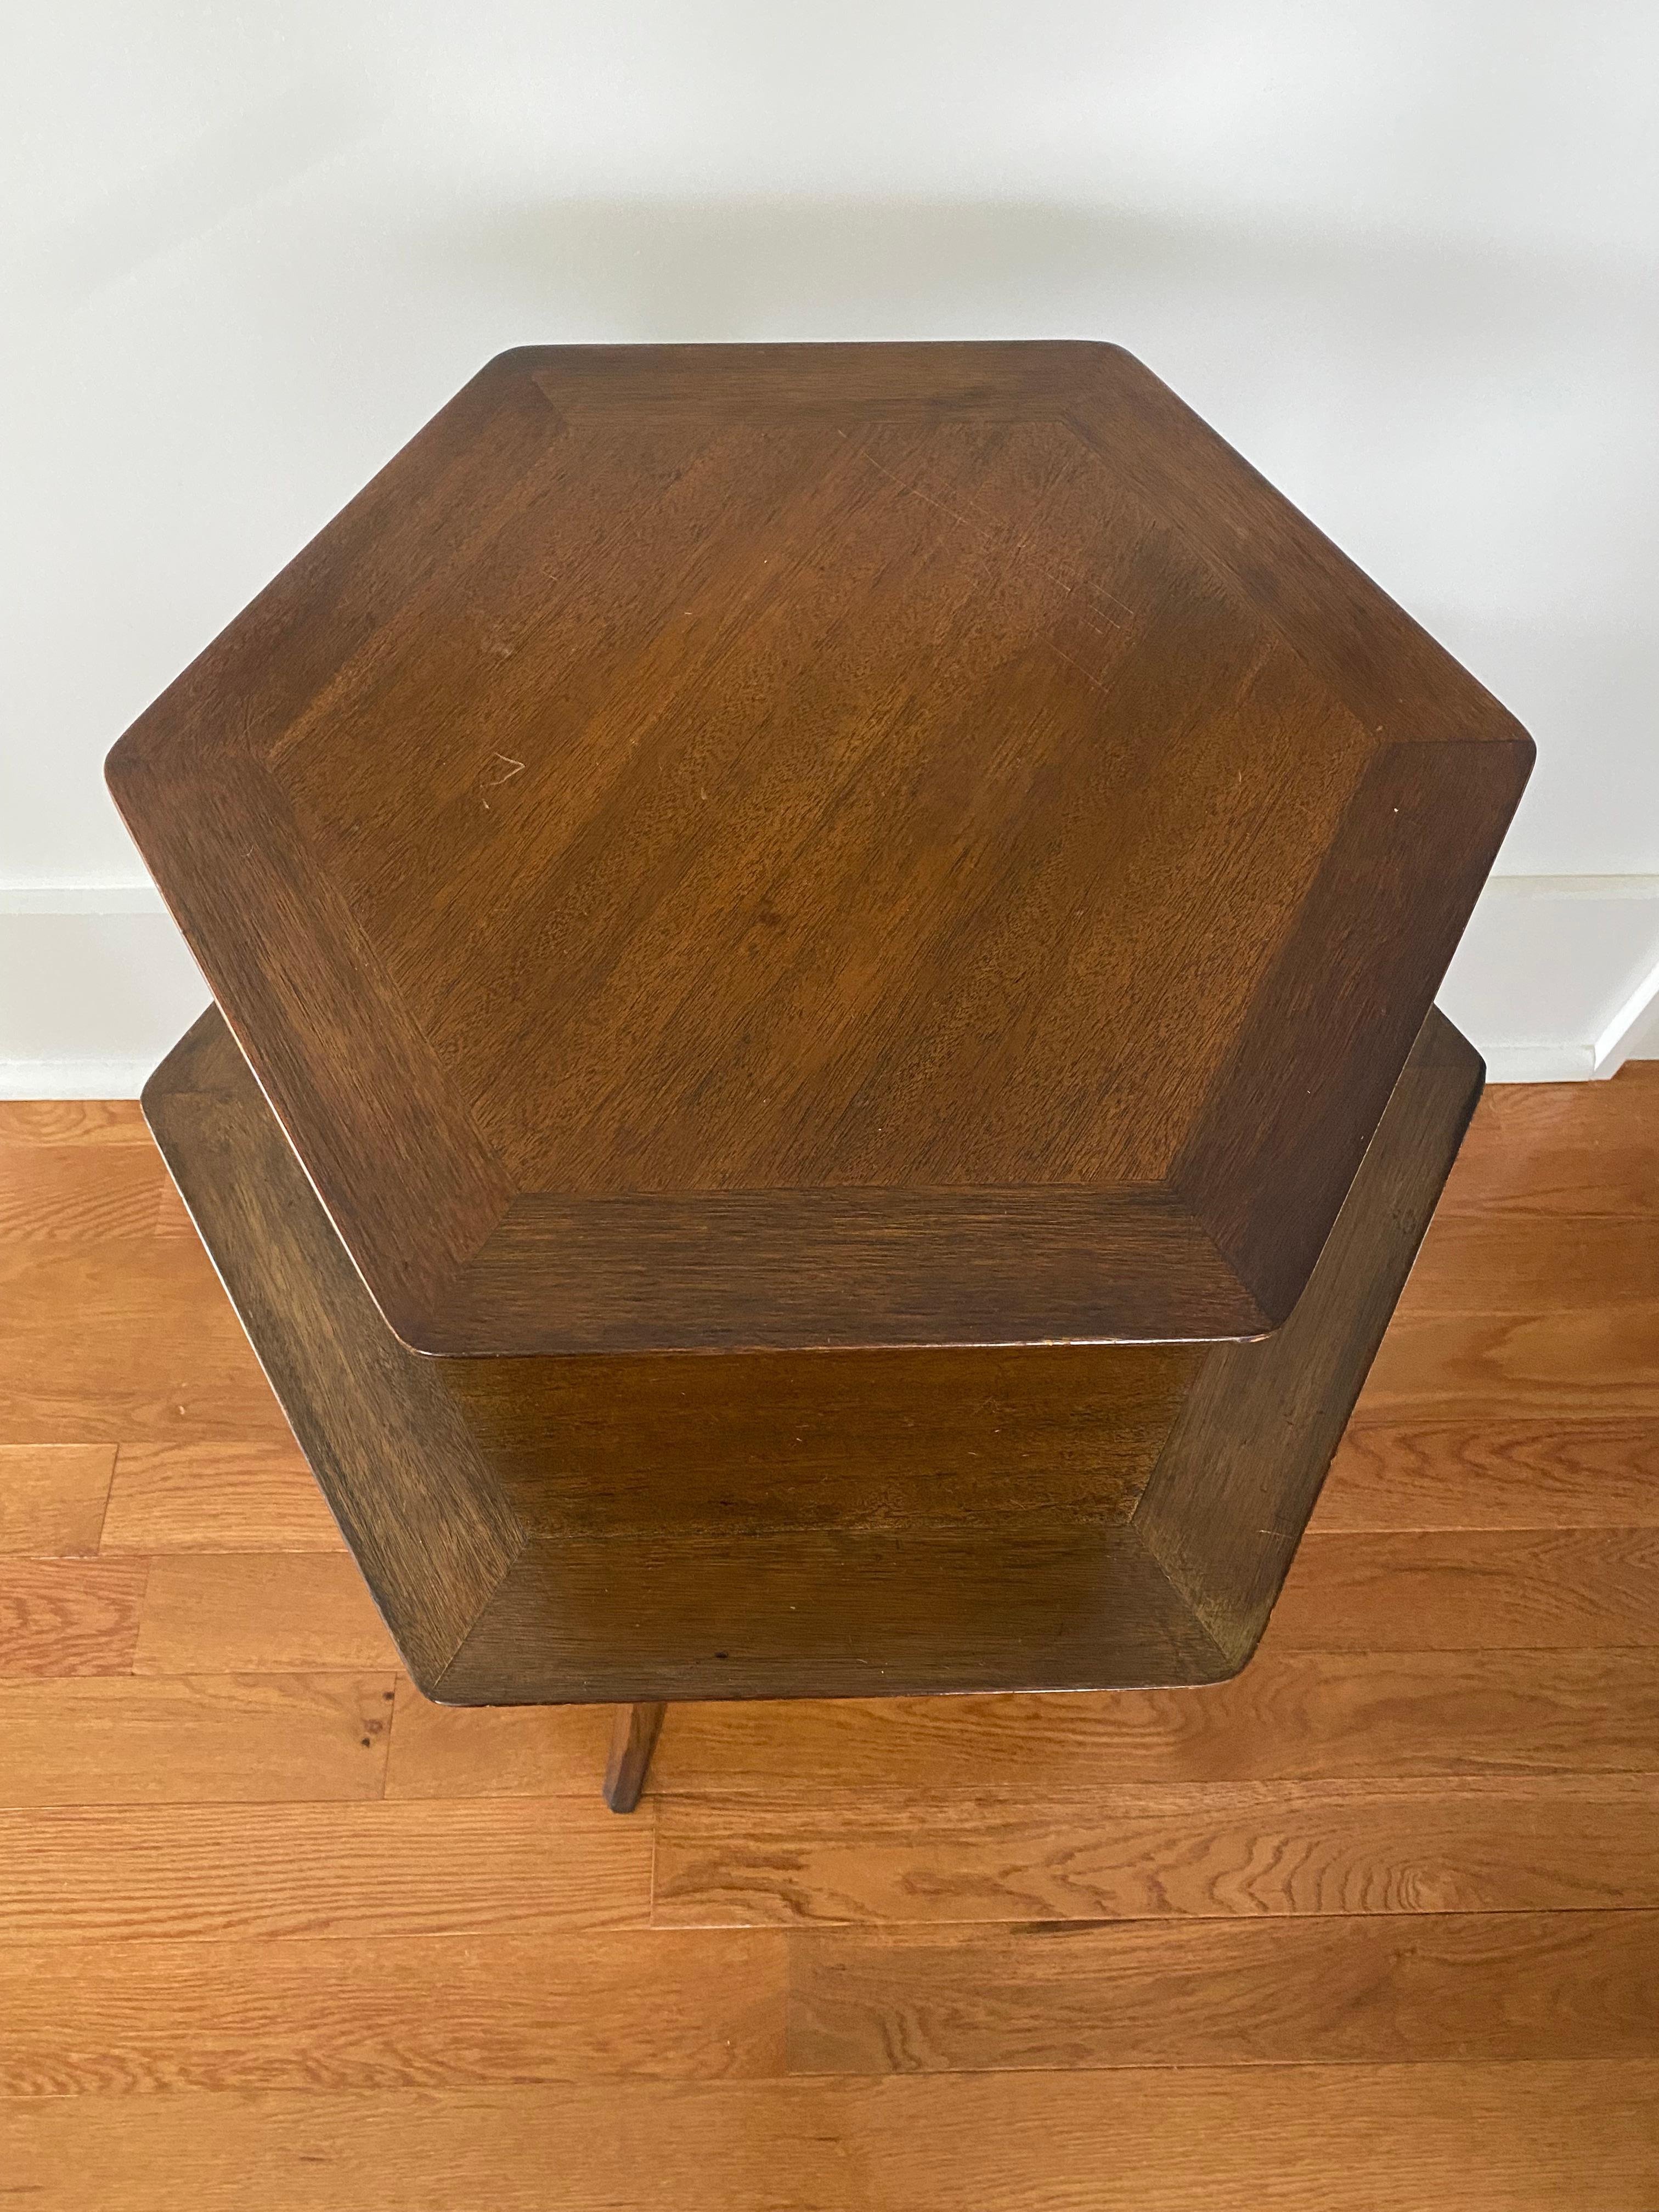 Unusual tiered side table - usually round but this version is hexagonal.
Three splayed legs for a transitional interior.
Labeled underneath with early Dunbar metal tag.